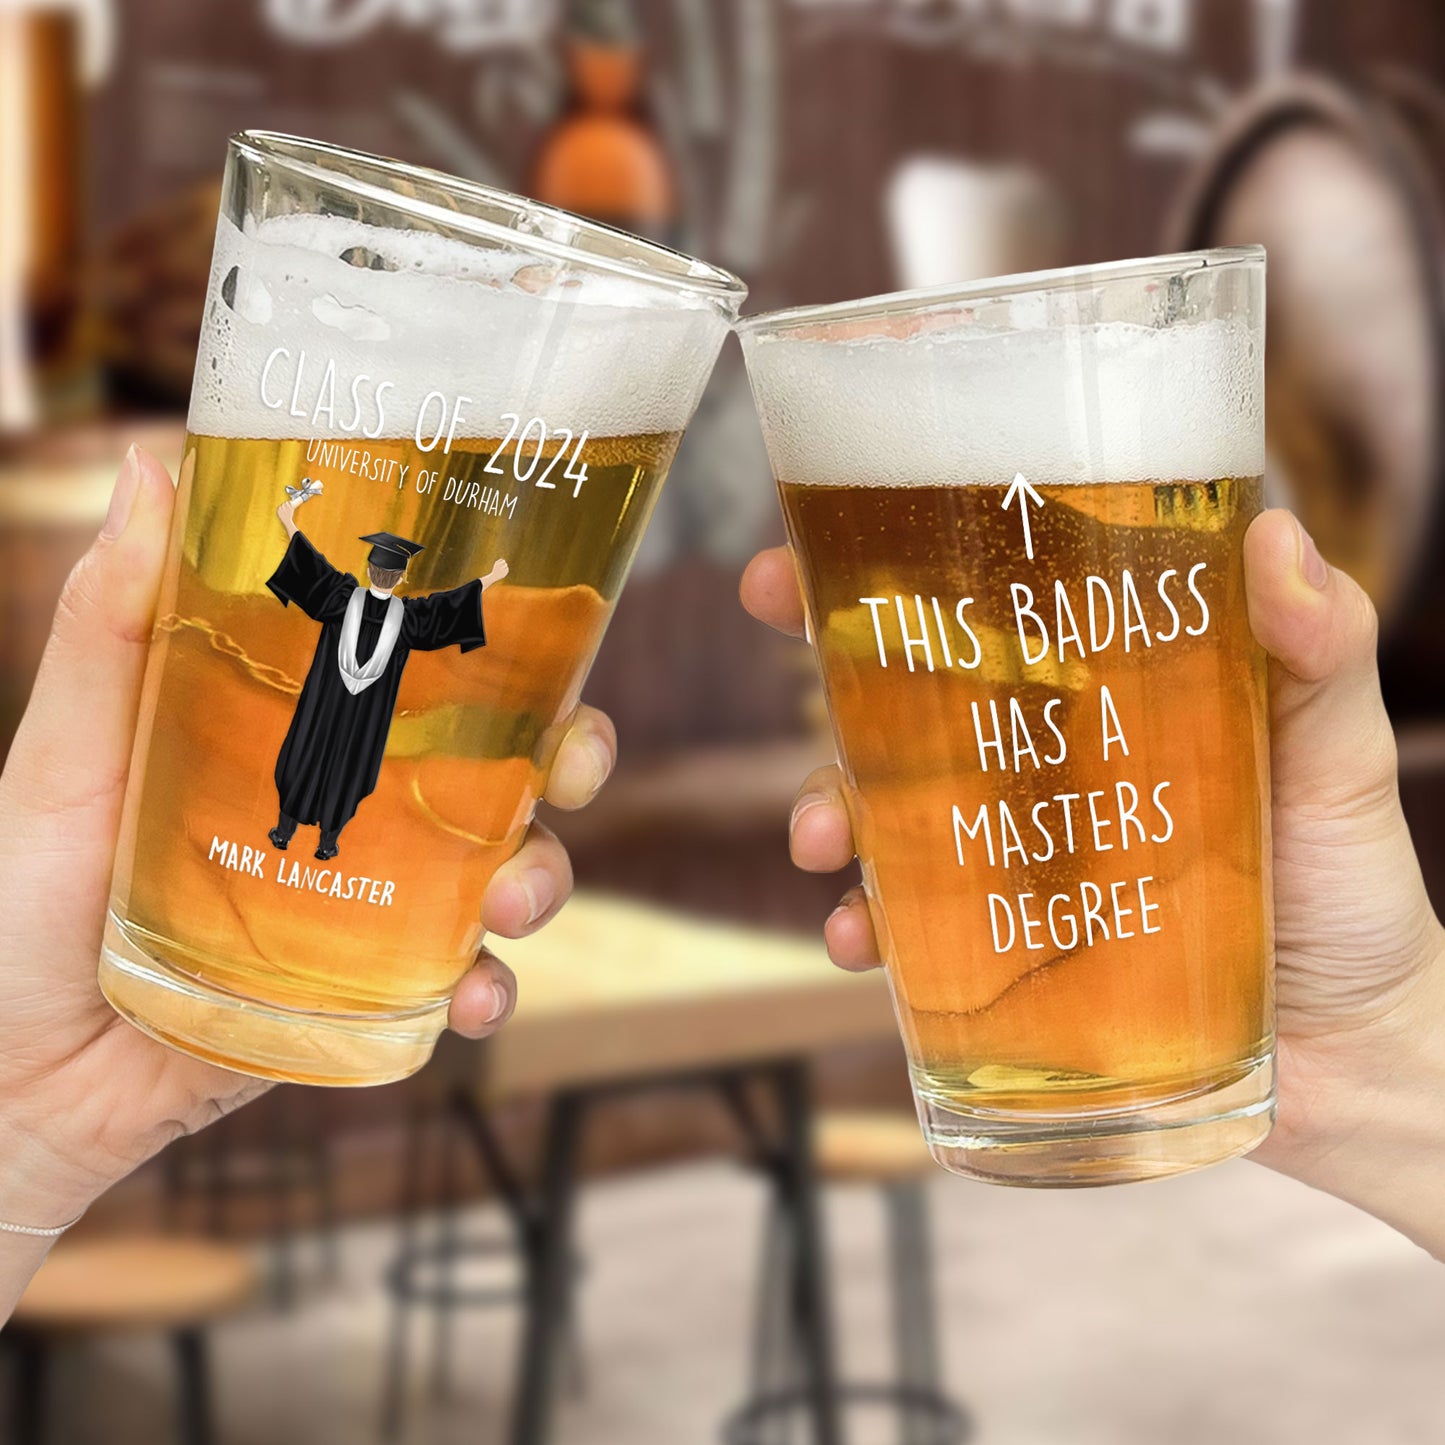 This Badass Has A Masters Degree - Personalized Beer Glass